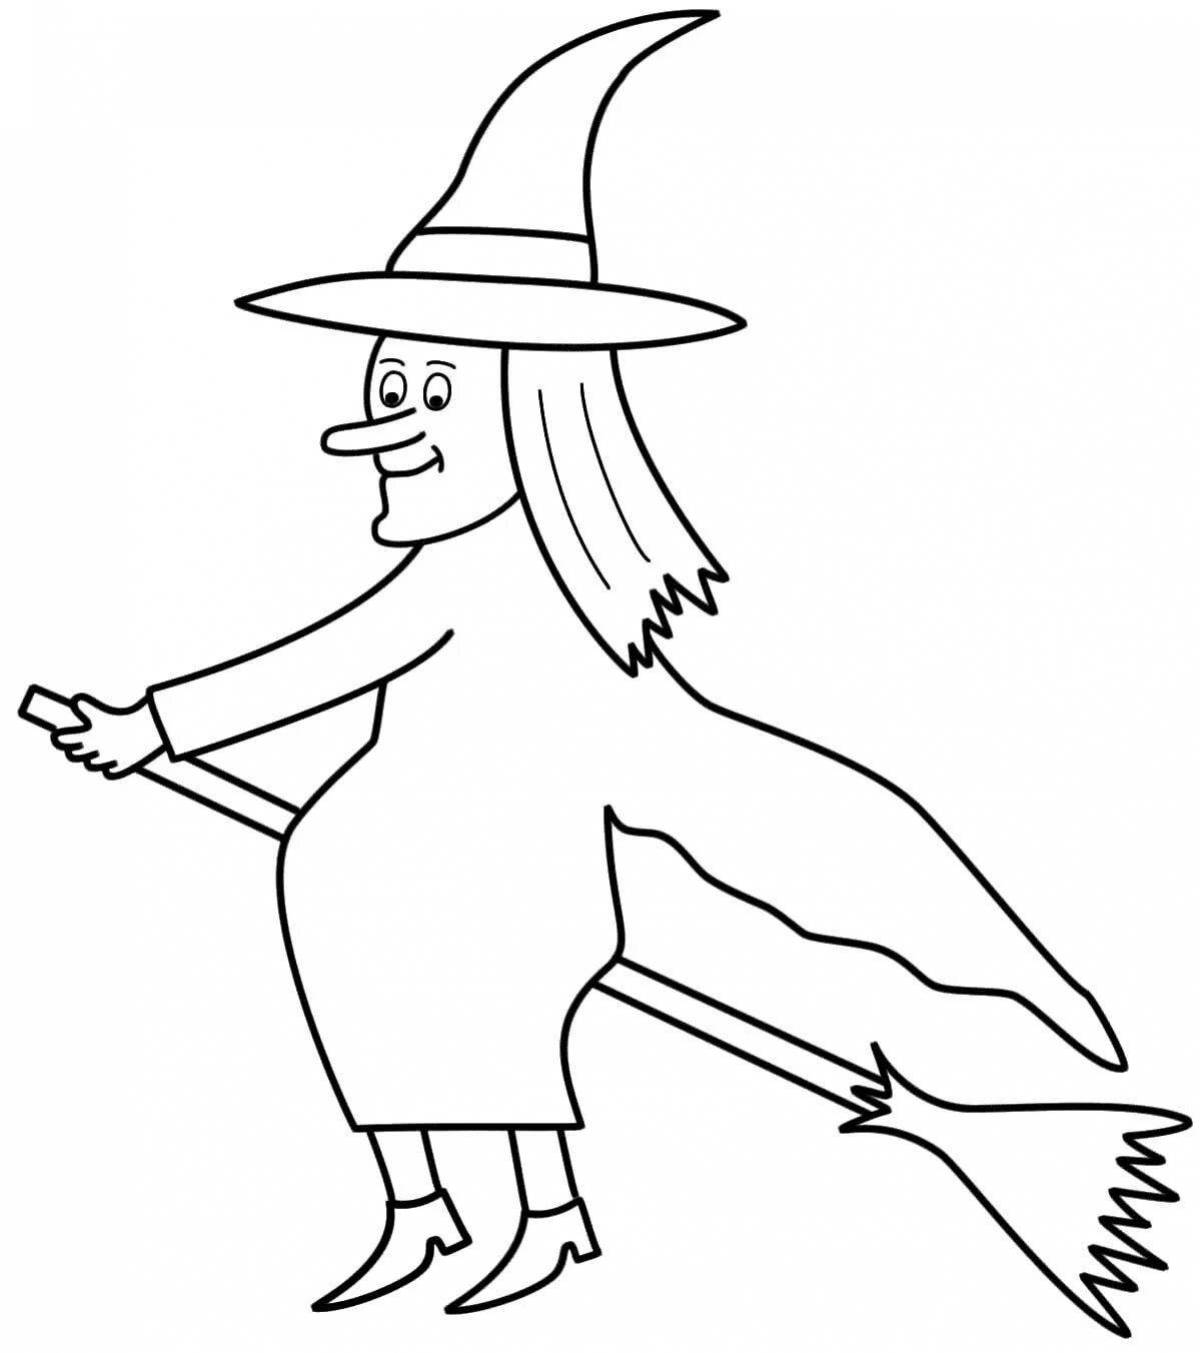 Witch ethereal coloring book